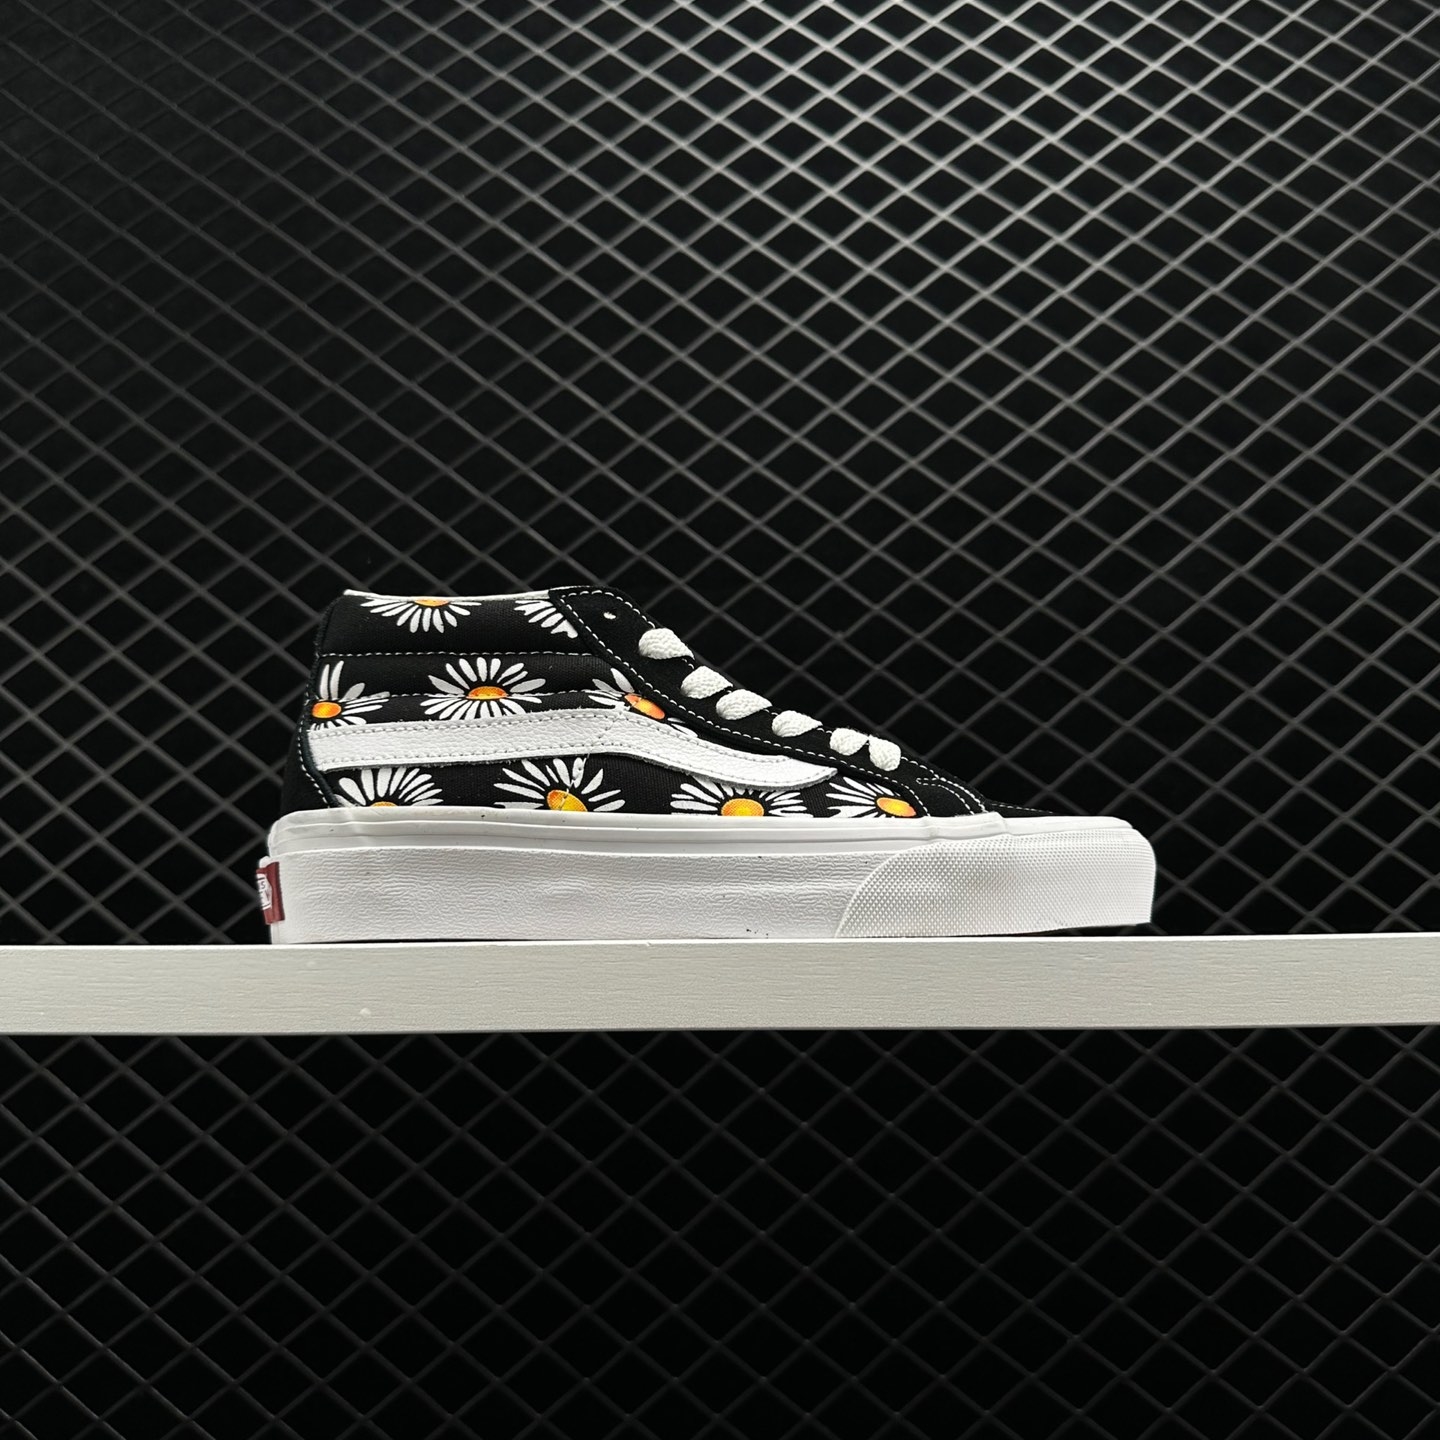 Vans SK8-Mid Flower Pattern Black White - Stylish Sneakers for a Chic Look